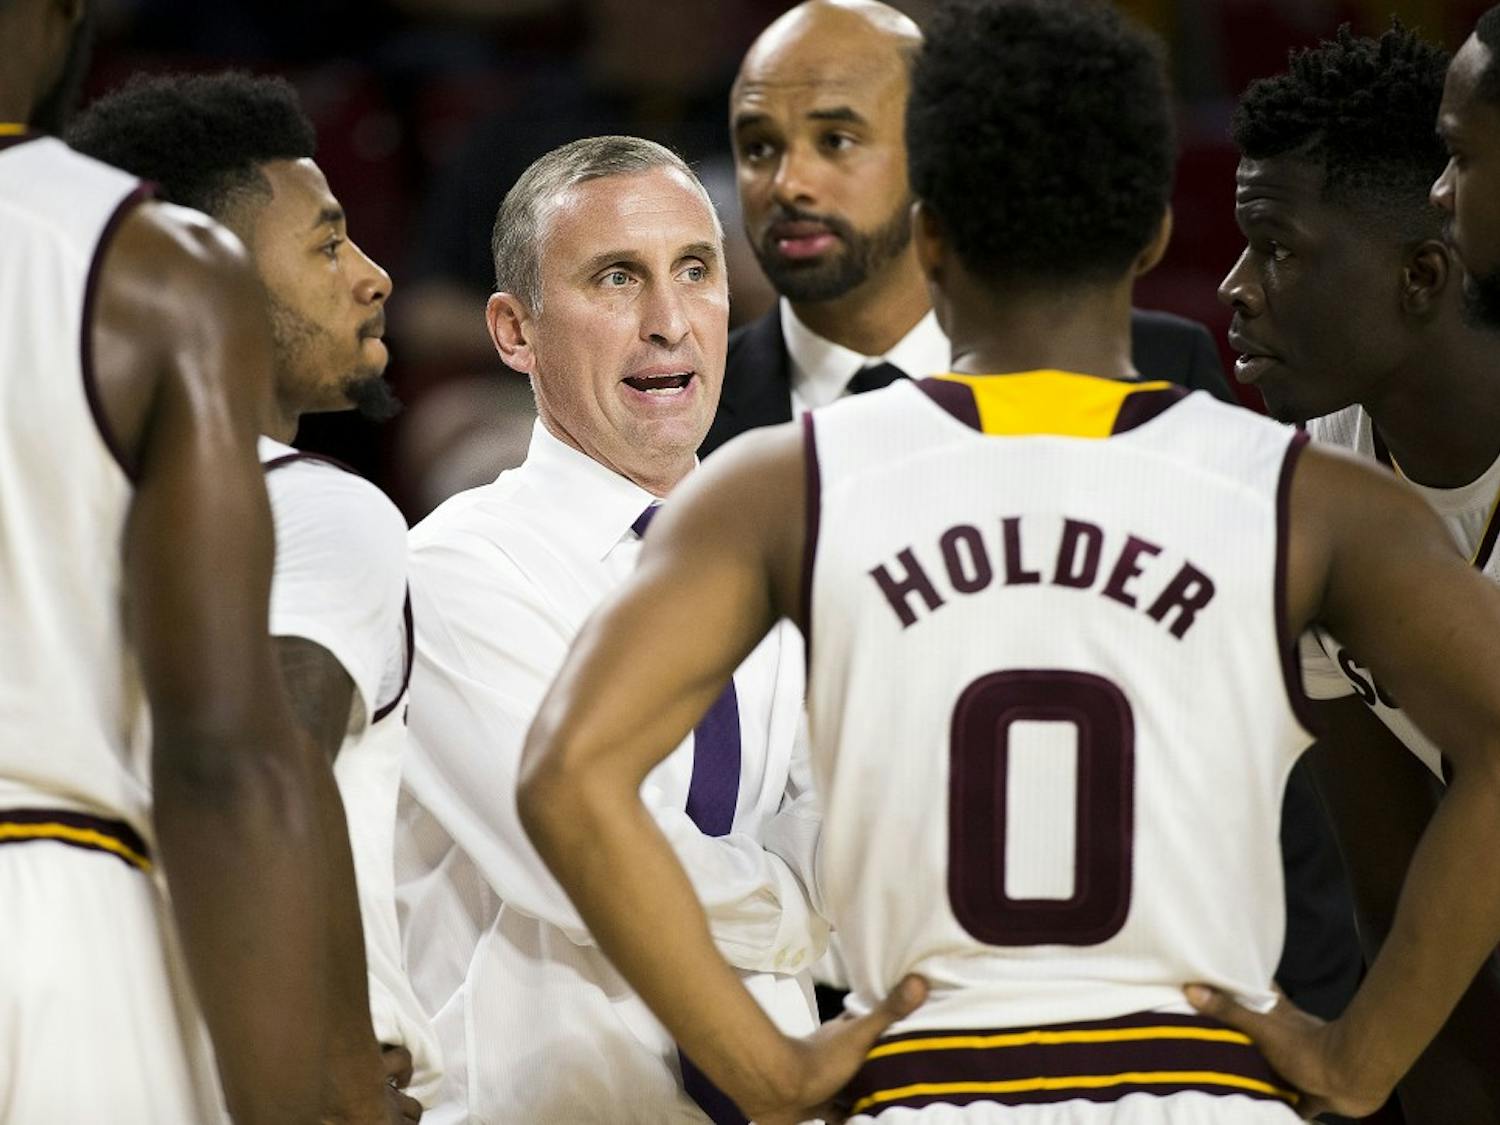 ASU head coach Bobby Hurley speaks to players during a timeout in a basketball game against the Citadel Bulldogs in Wells Fargo Arena in Tempe, Arizona, on Wednesday, Nov. 23, 2016. 